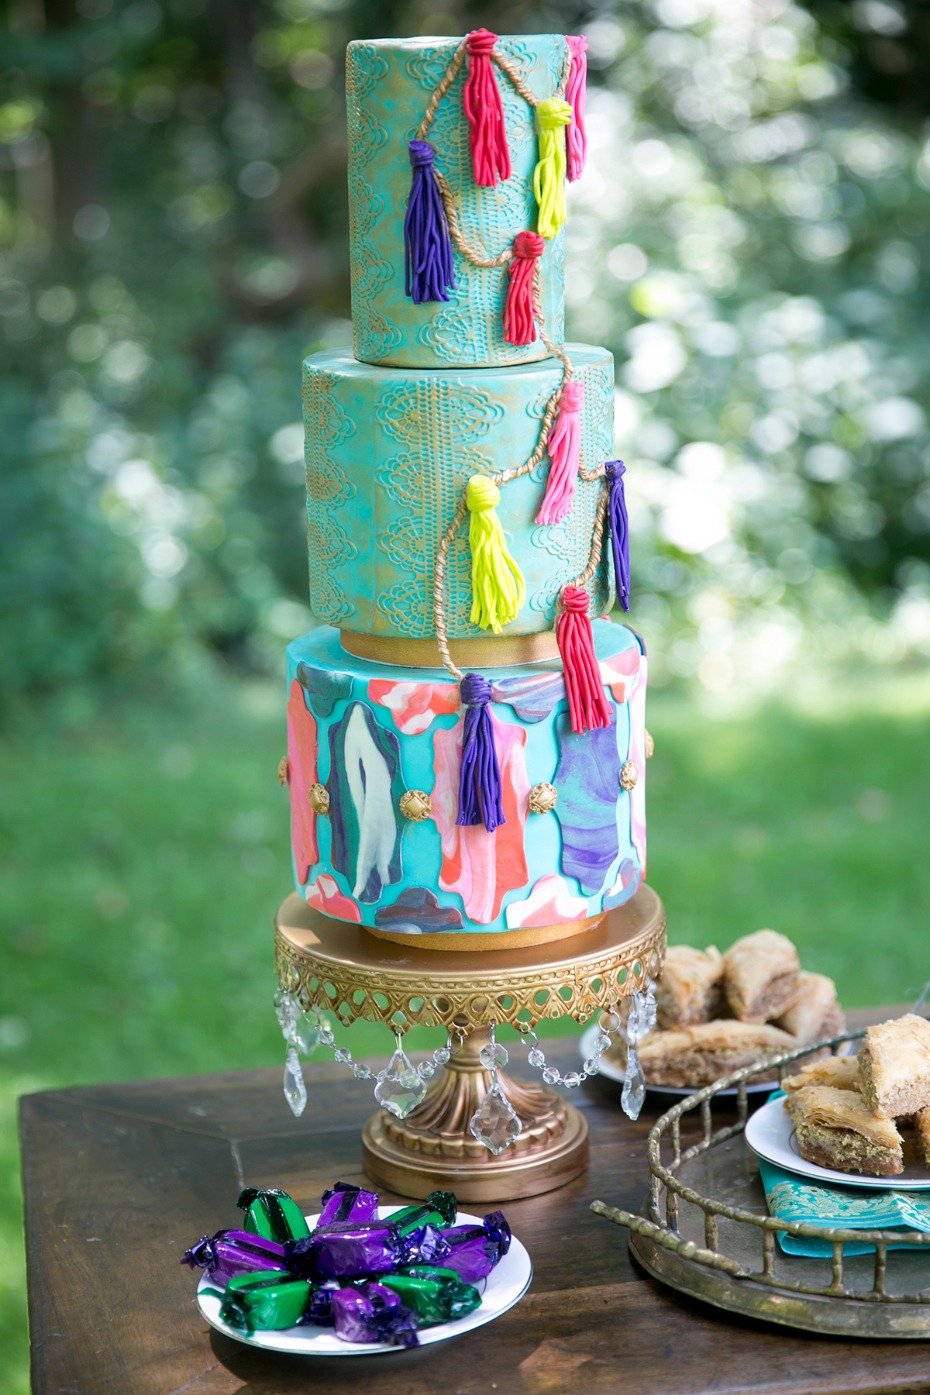 whimsical tassel cake in teal and gold